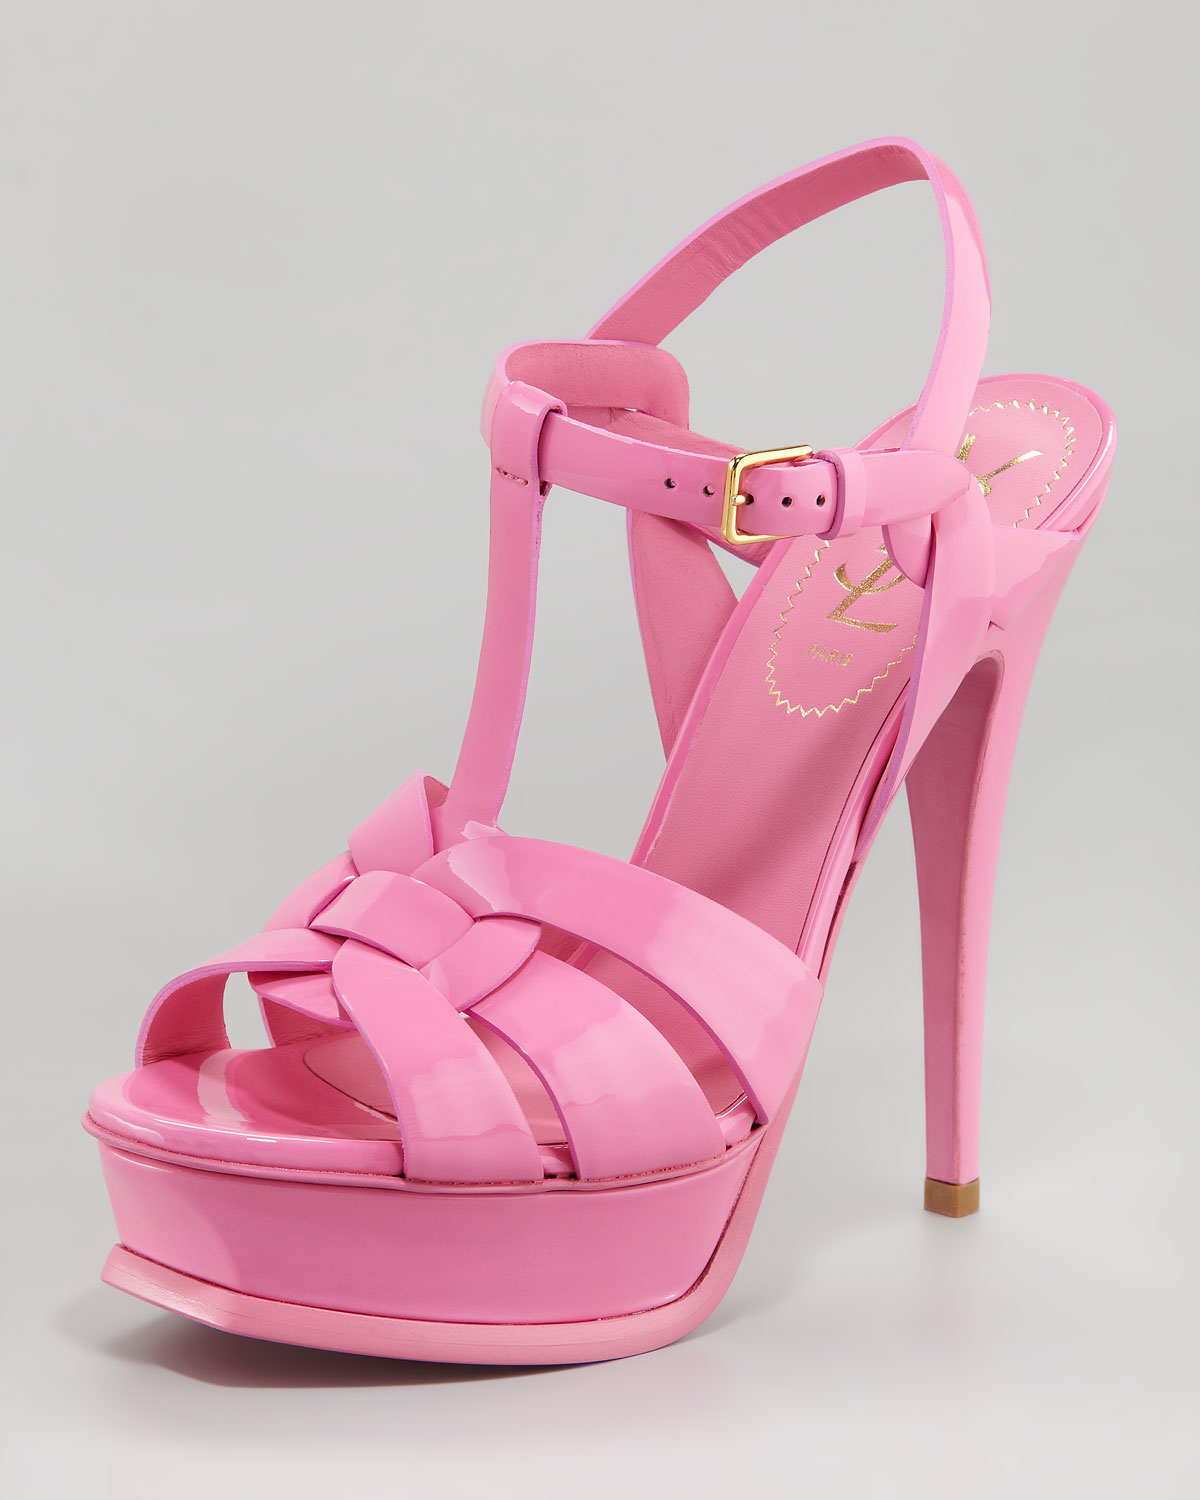 ysl pink shoes